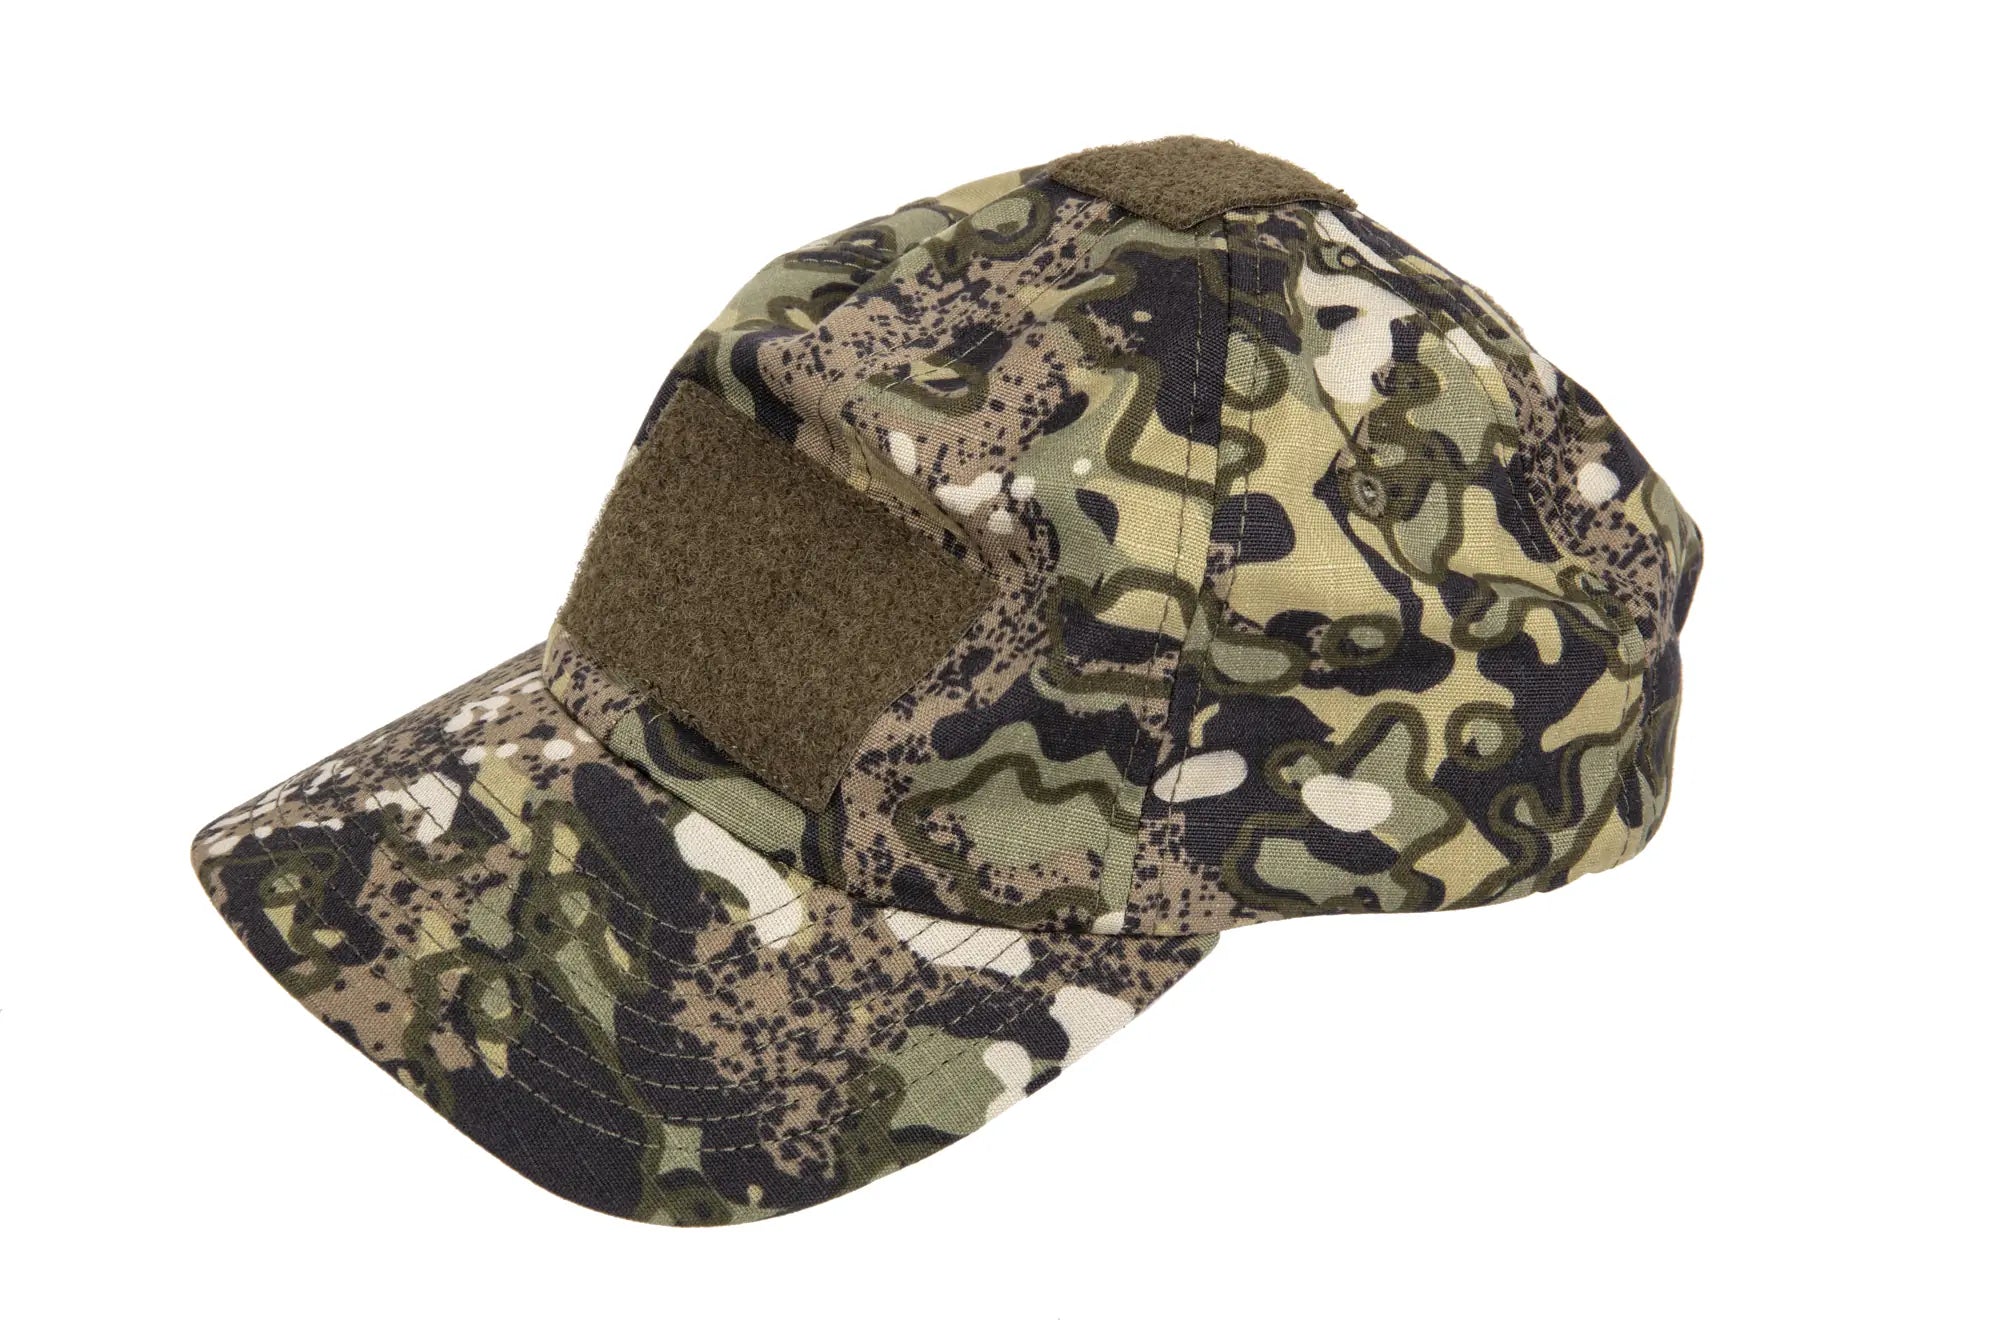 MAPA Tactical Hat with unique camouflage print, comfortable fit, and durability.